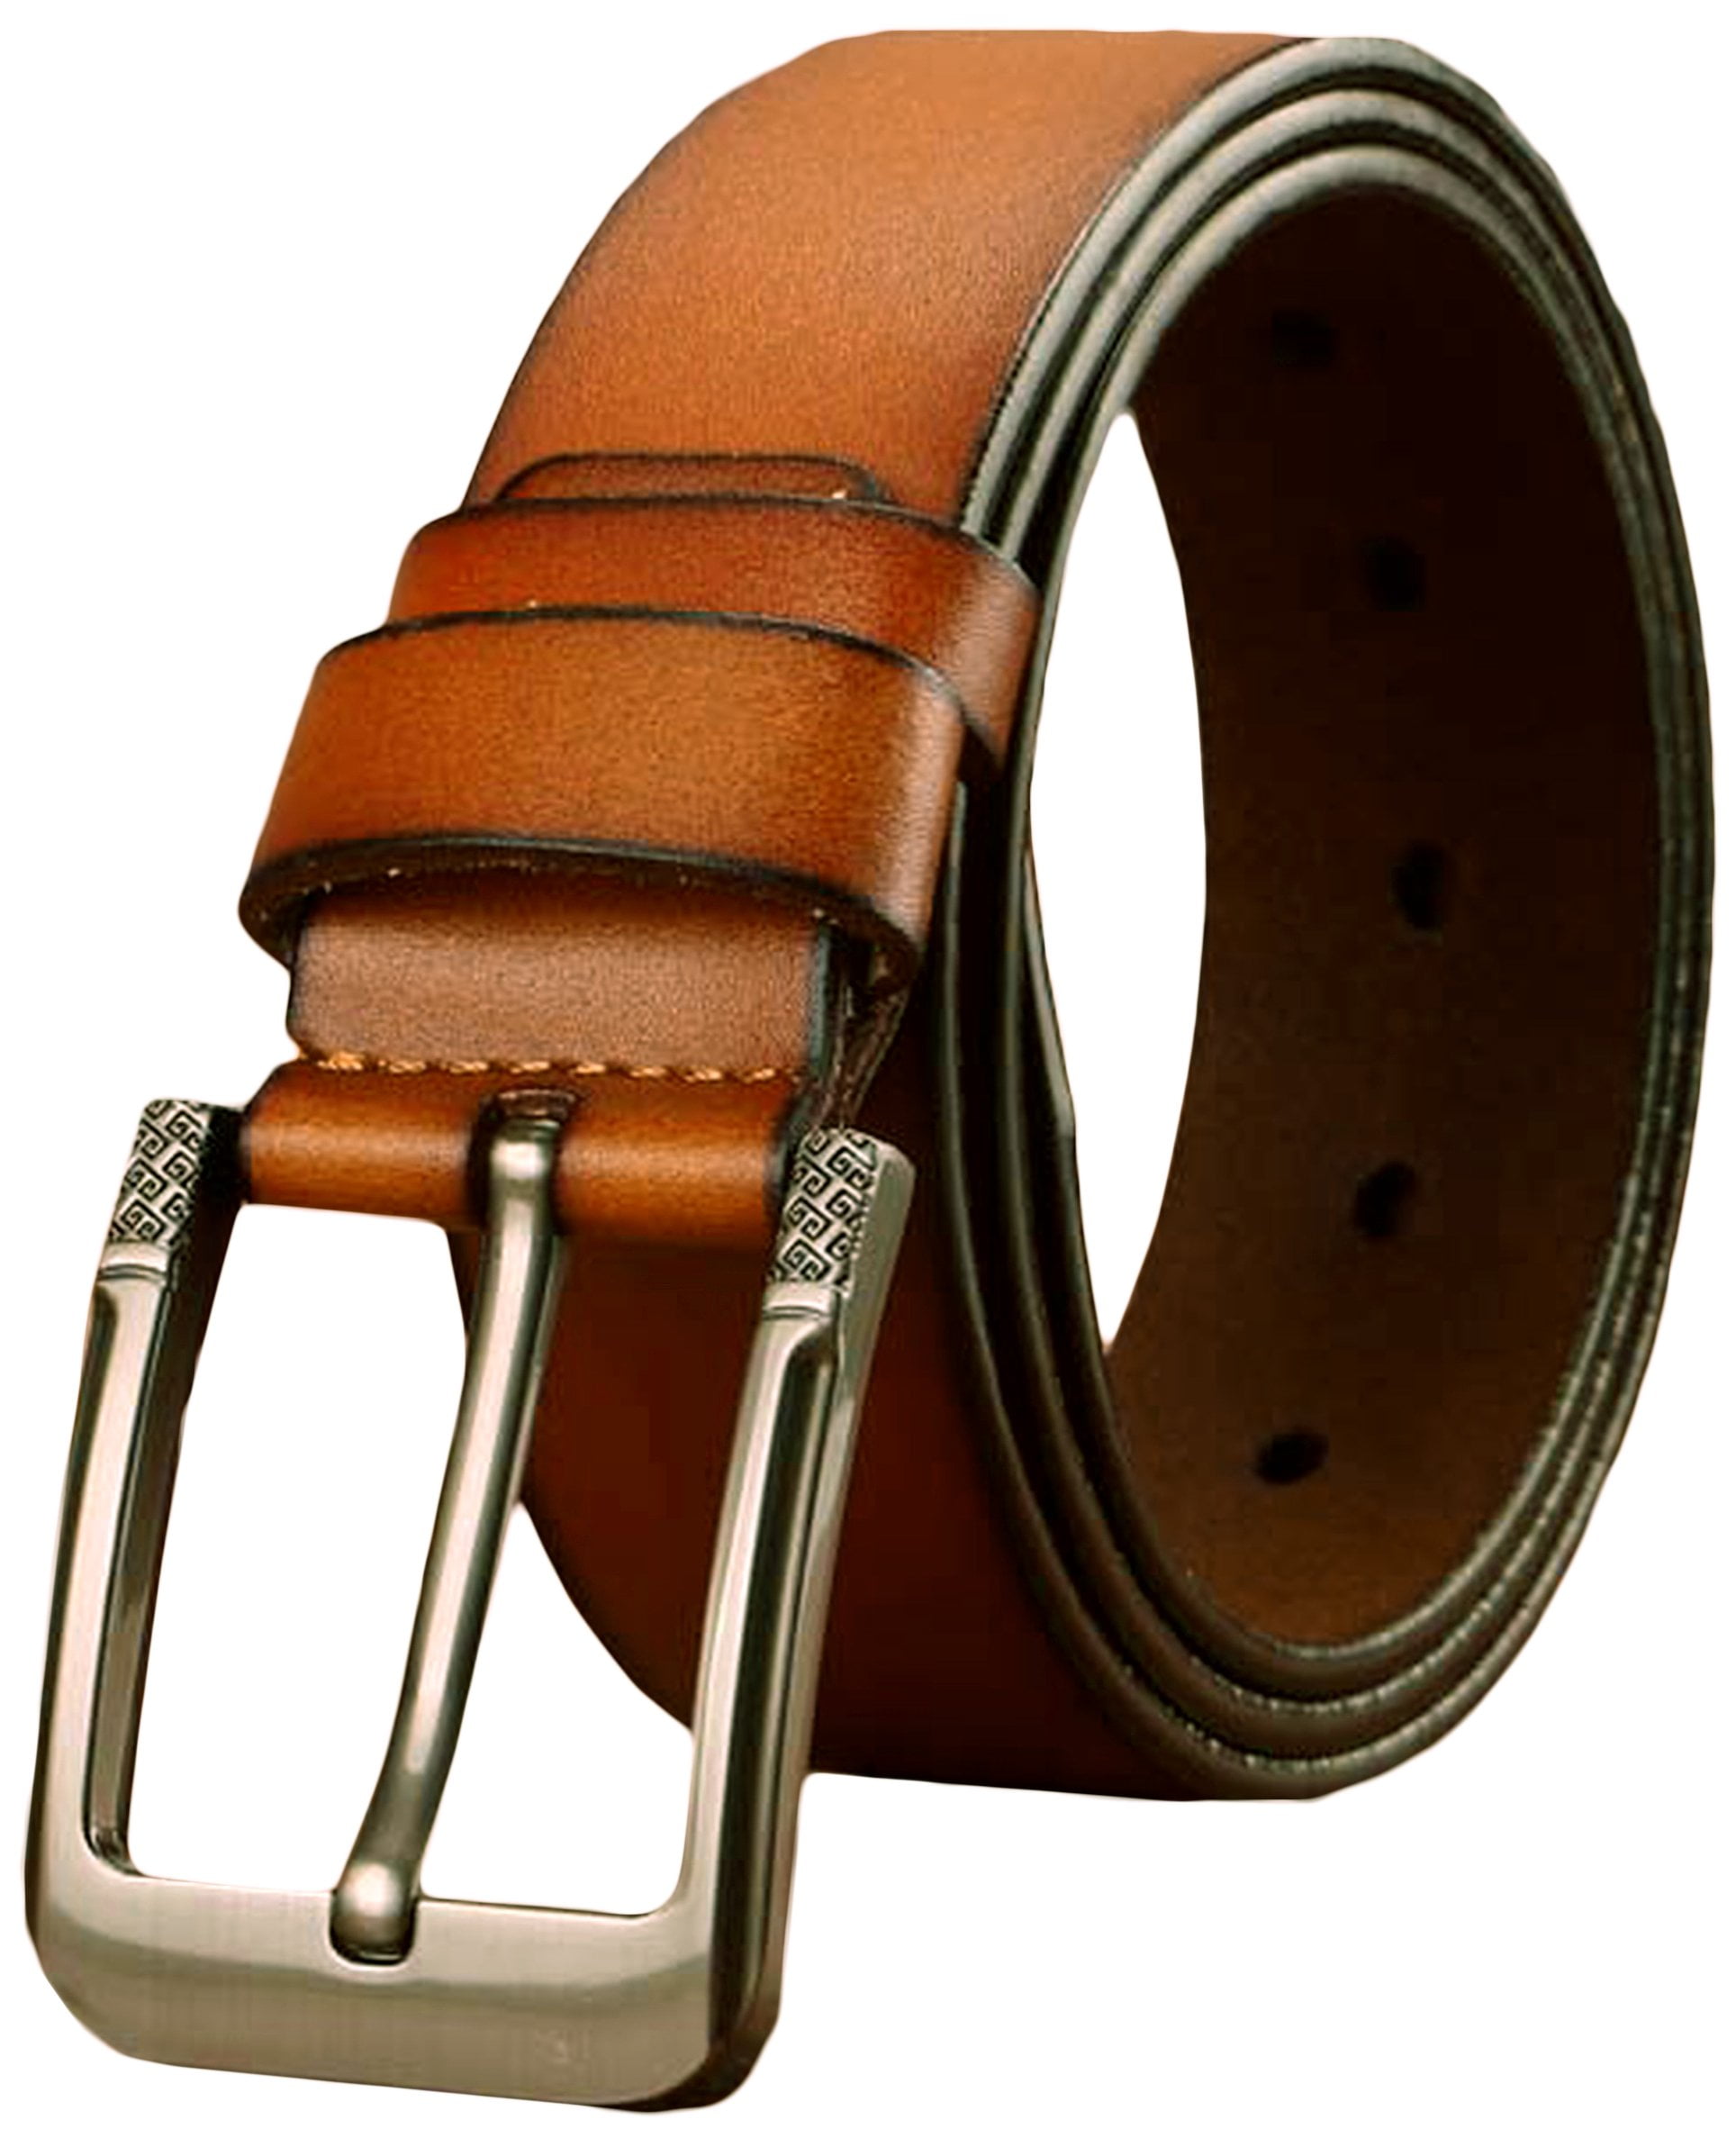 4 Colors 1.25 in Leather Handcrafted Men's Dress Belt w/Brass Buckle 